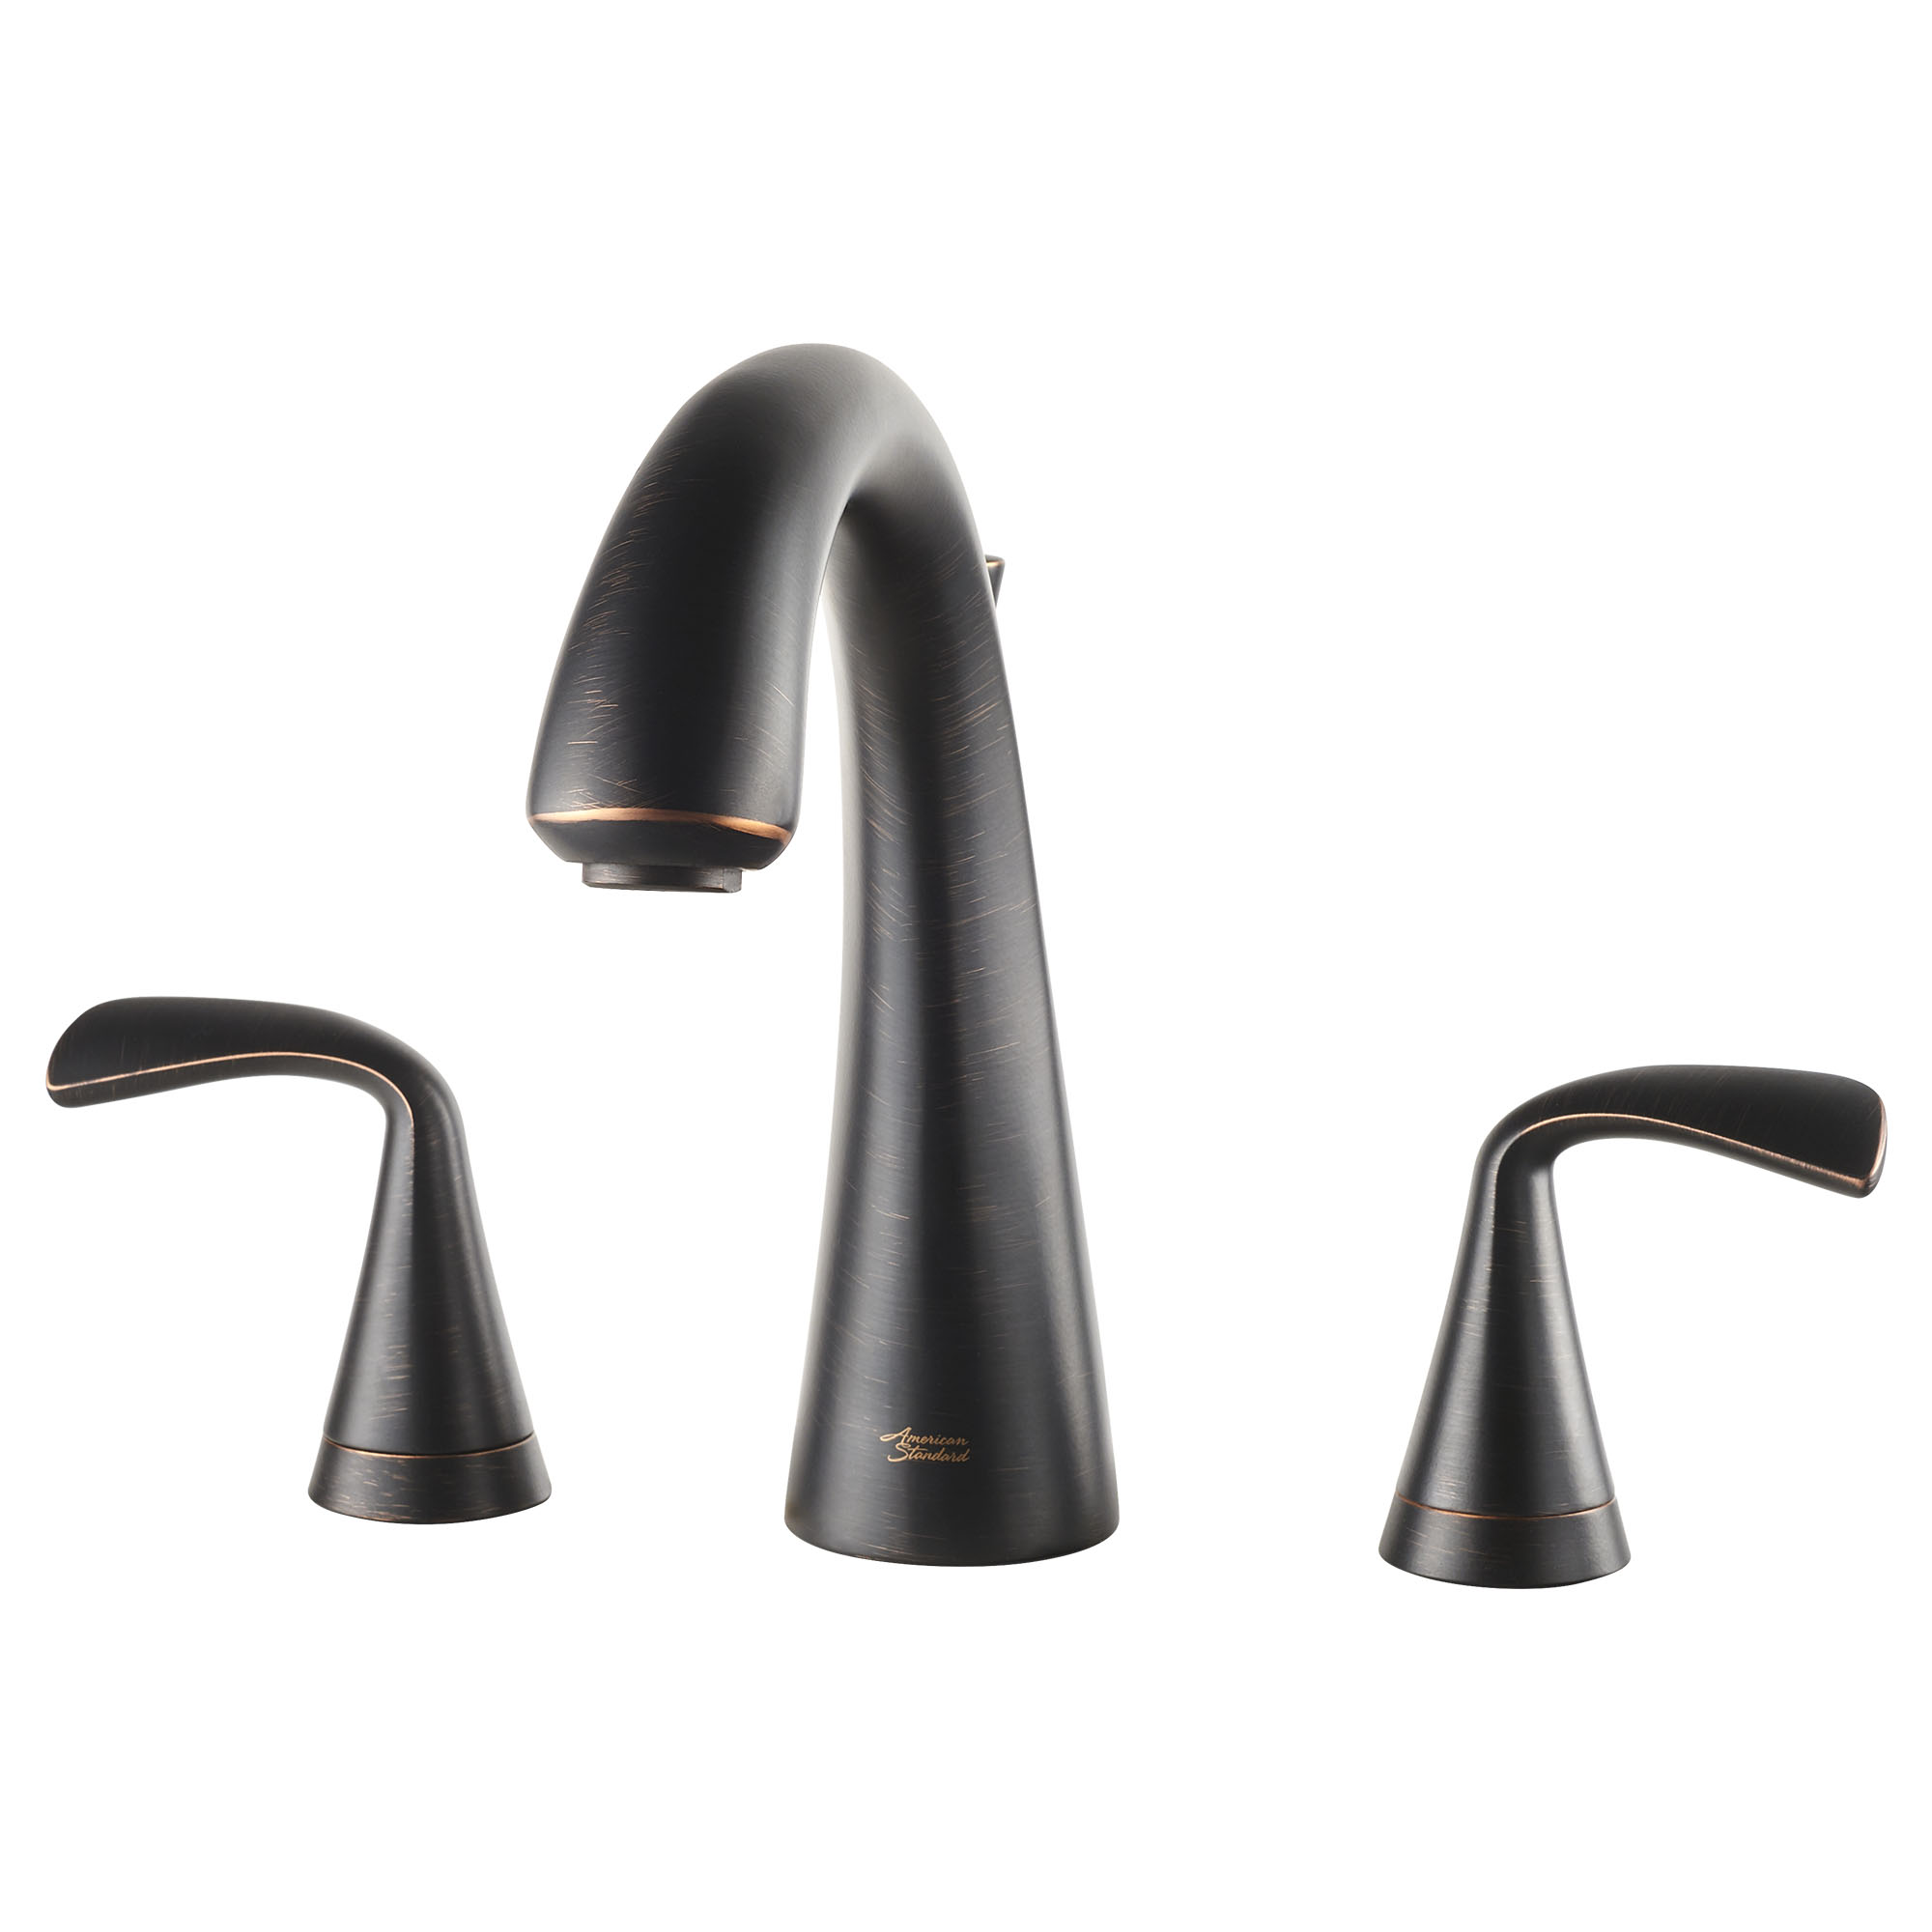 Fluent® Bathtub Faucet With Lever Handles for Flash® Rough-In Valve